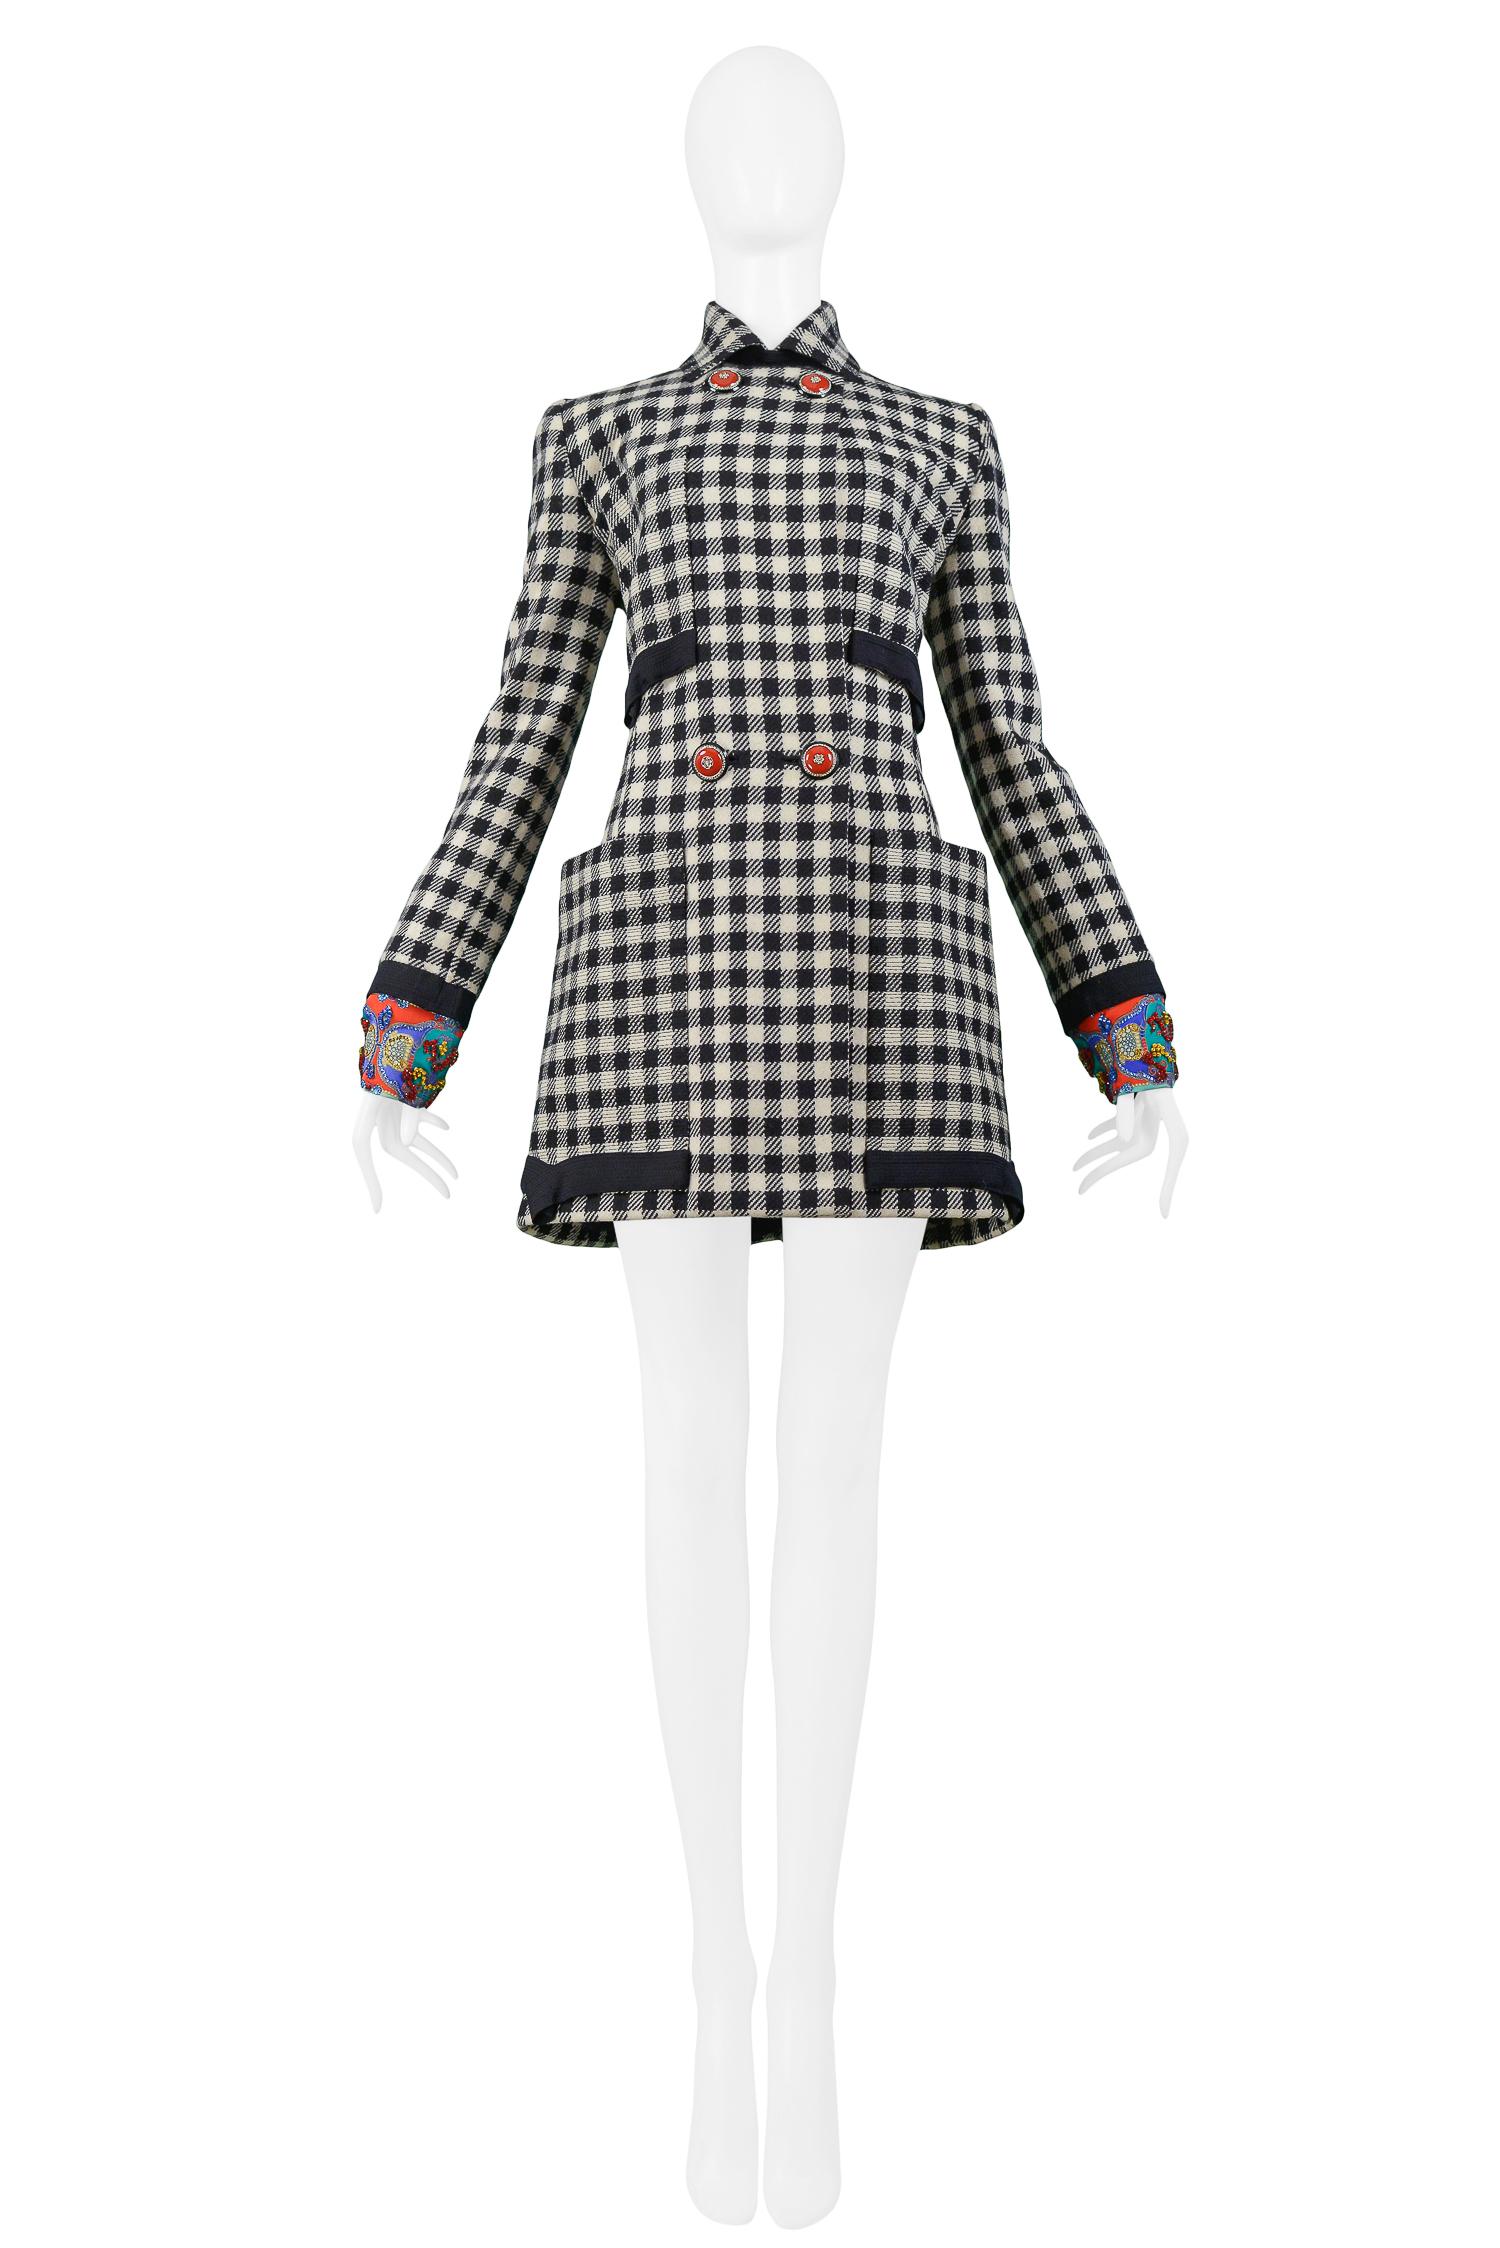 Rare and unusual vintage Gianni Versace Atelier runway black and white 100% Lana wool check coat The coat features a double-breasted front with stunning red metal and crystal buttons, five matching buttons on the cuffs, four front pockets with black